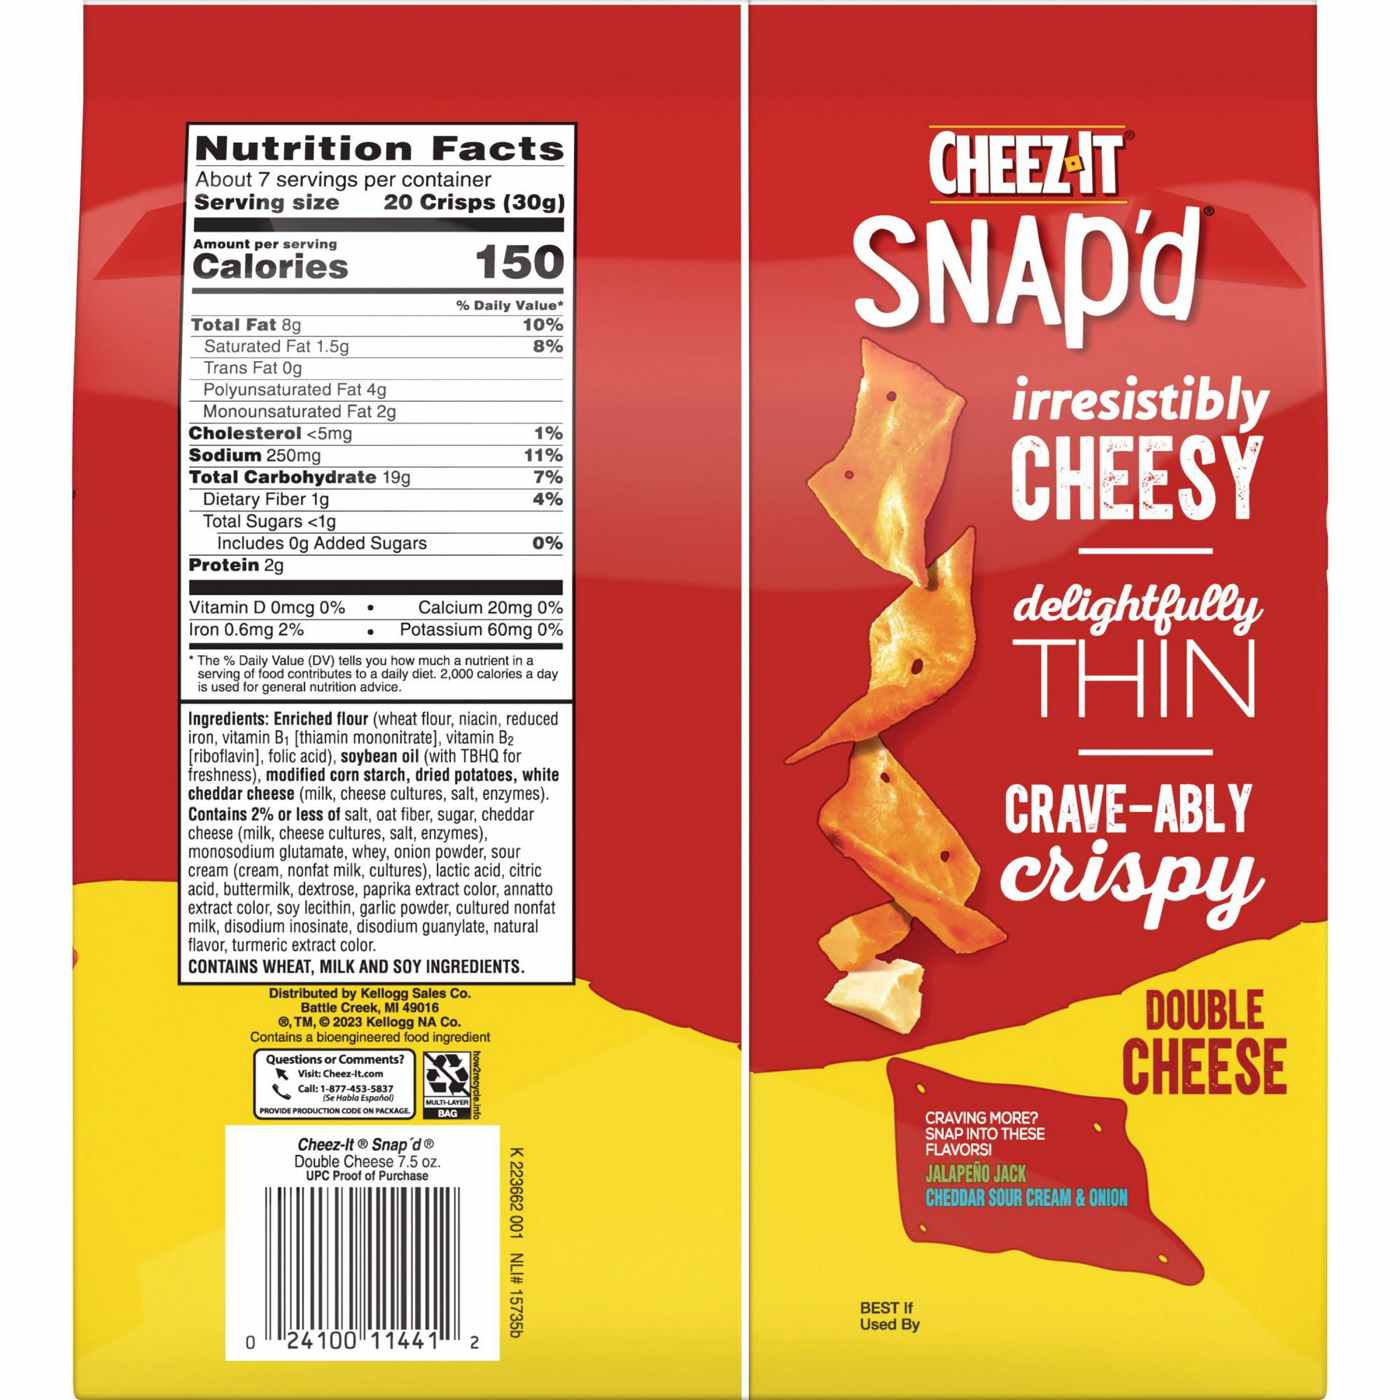 Cheez-It Snap'd Double Cheese Cheese Cracker Chips; image 2 of 5